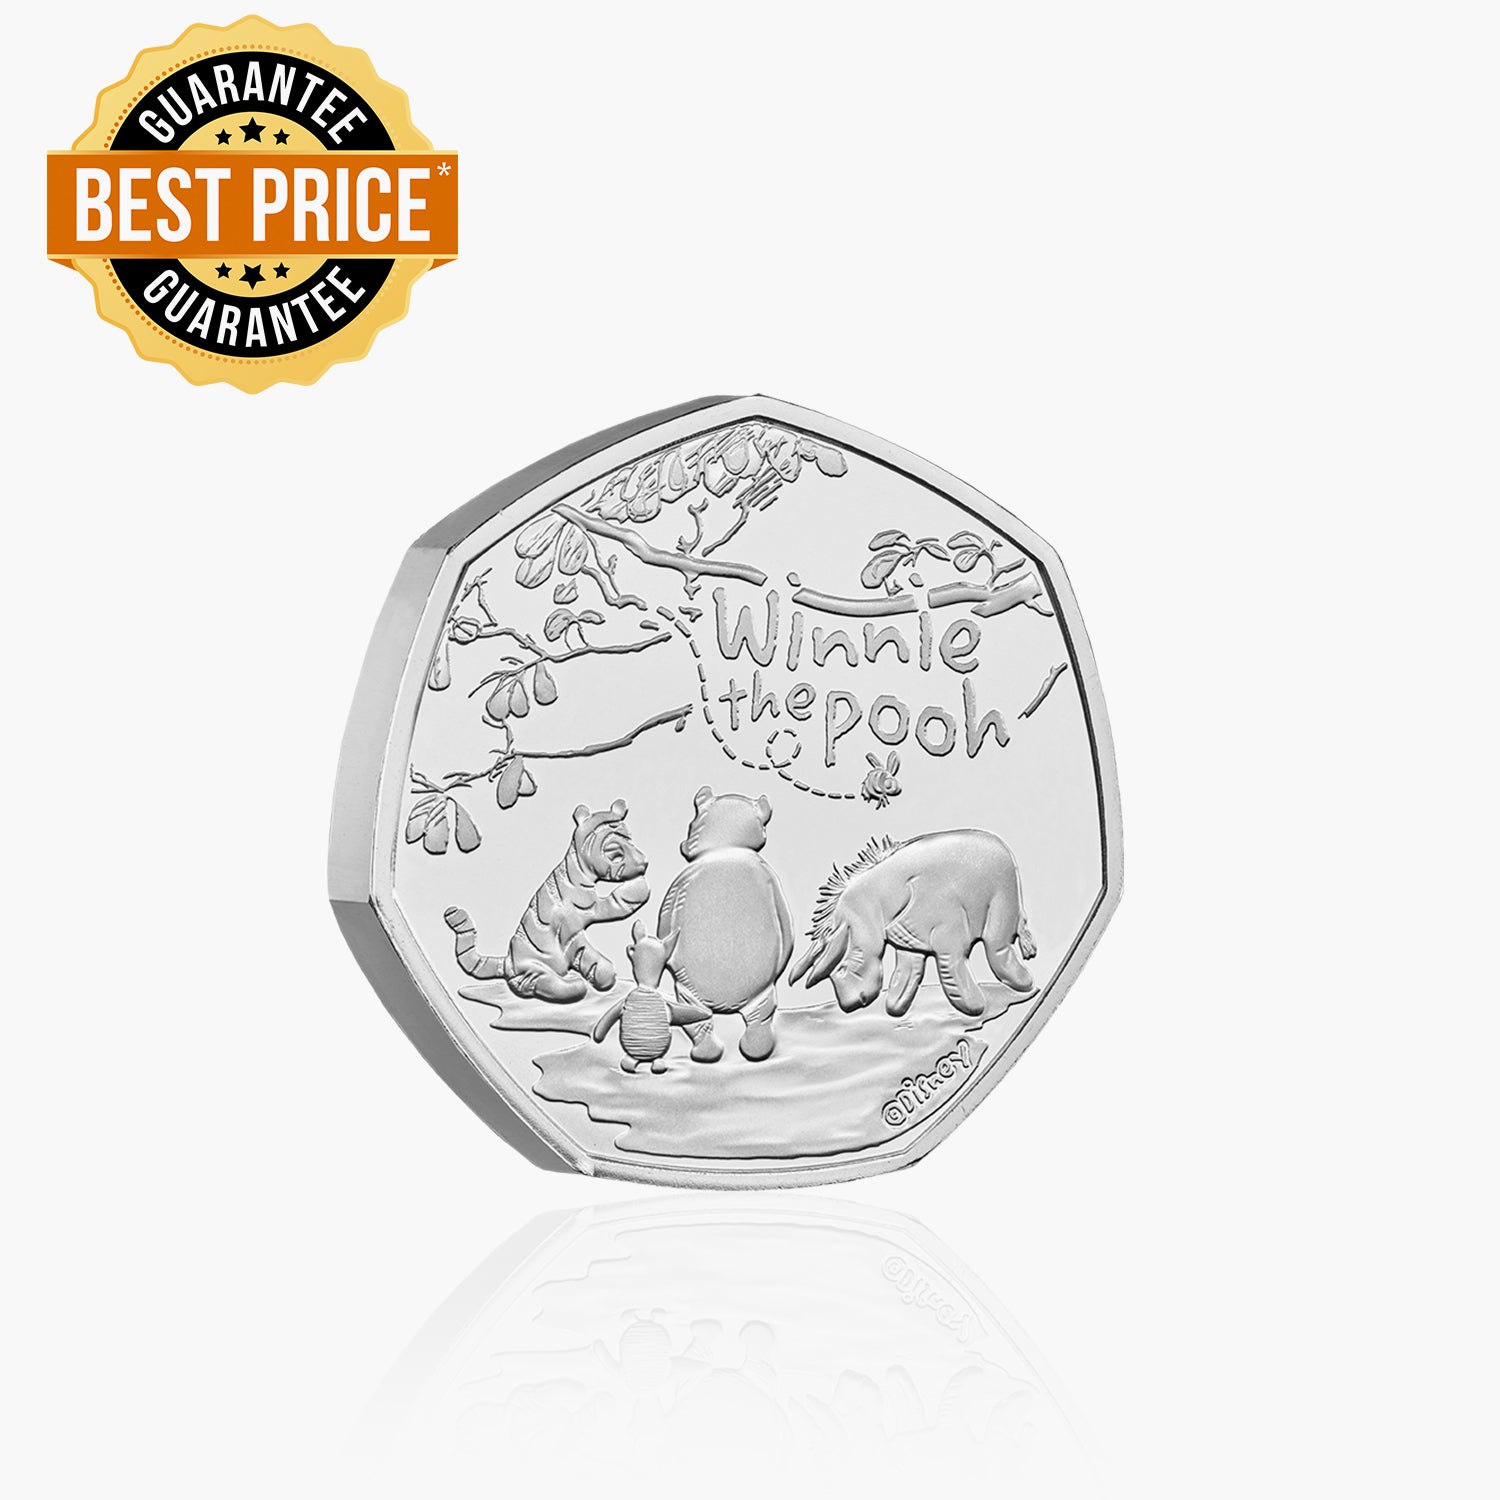 Winnie and Friends 2022 UK 50p Coin